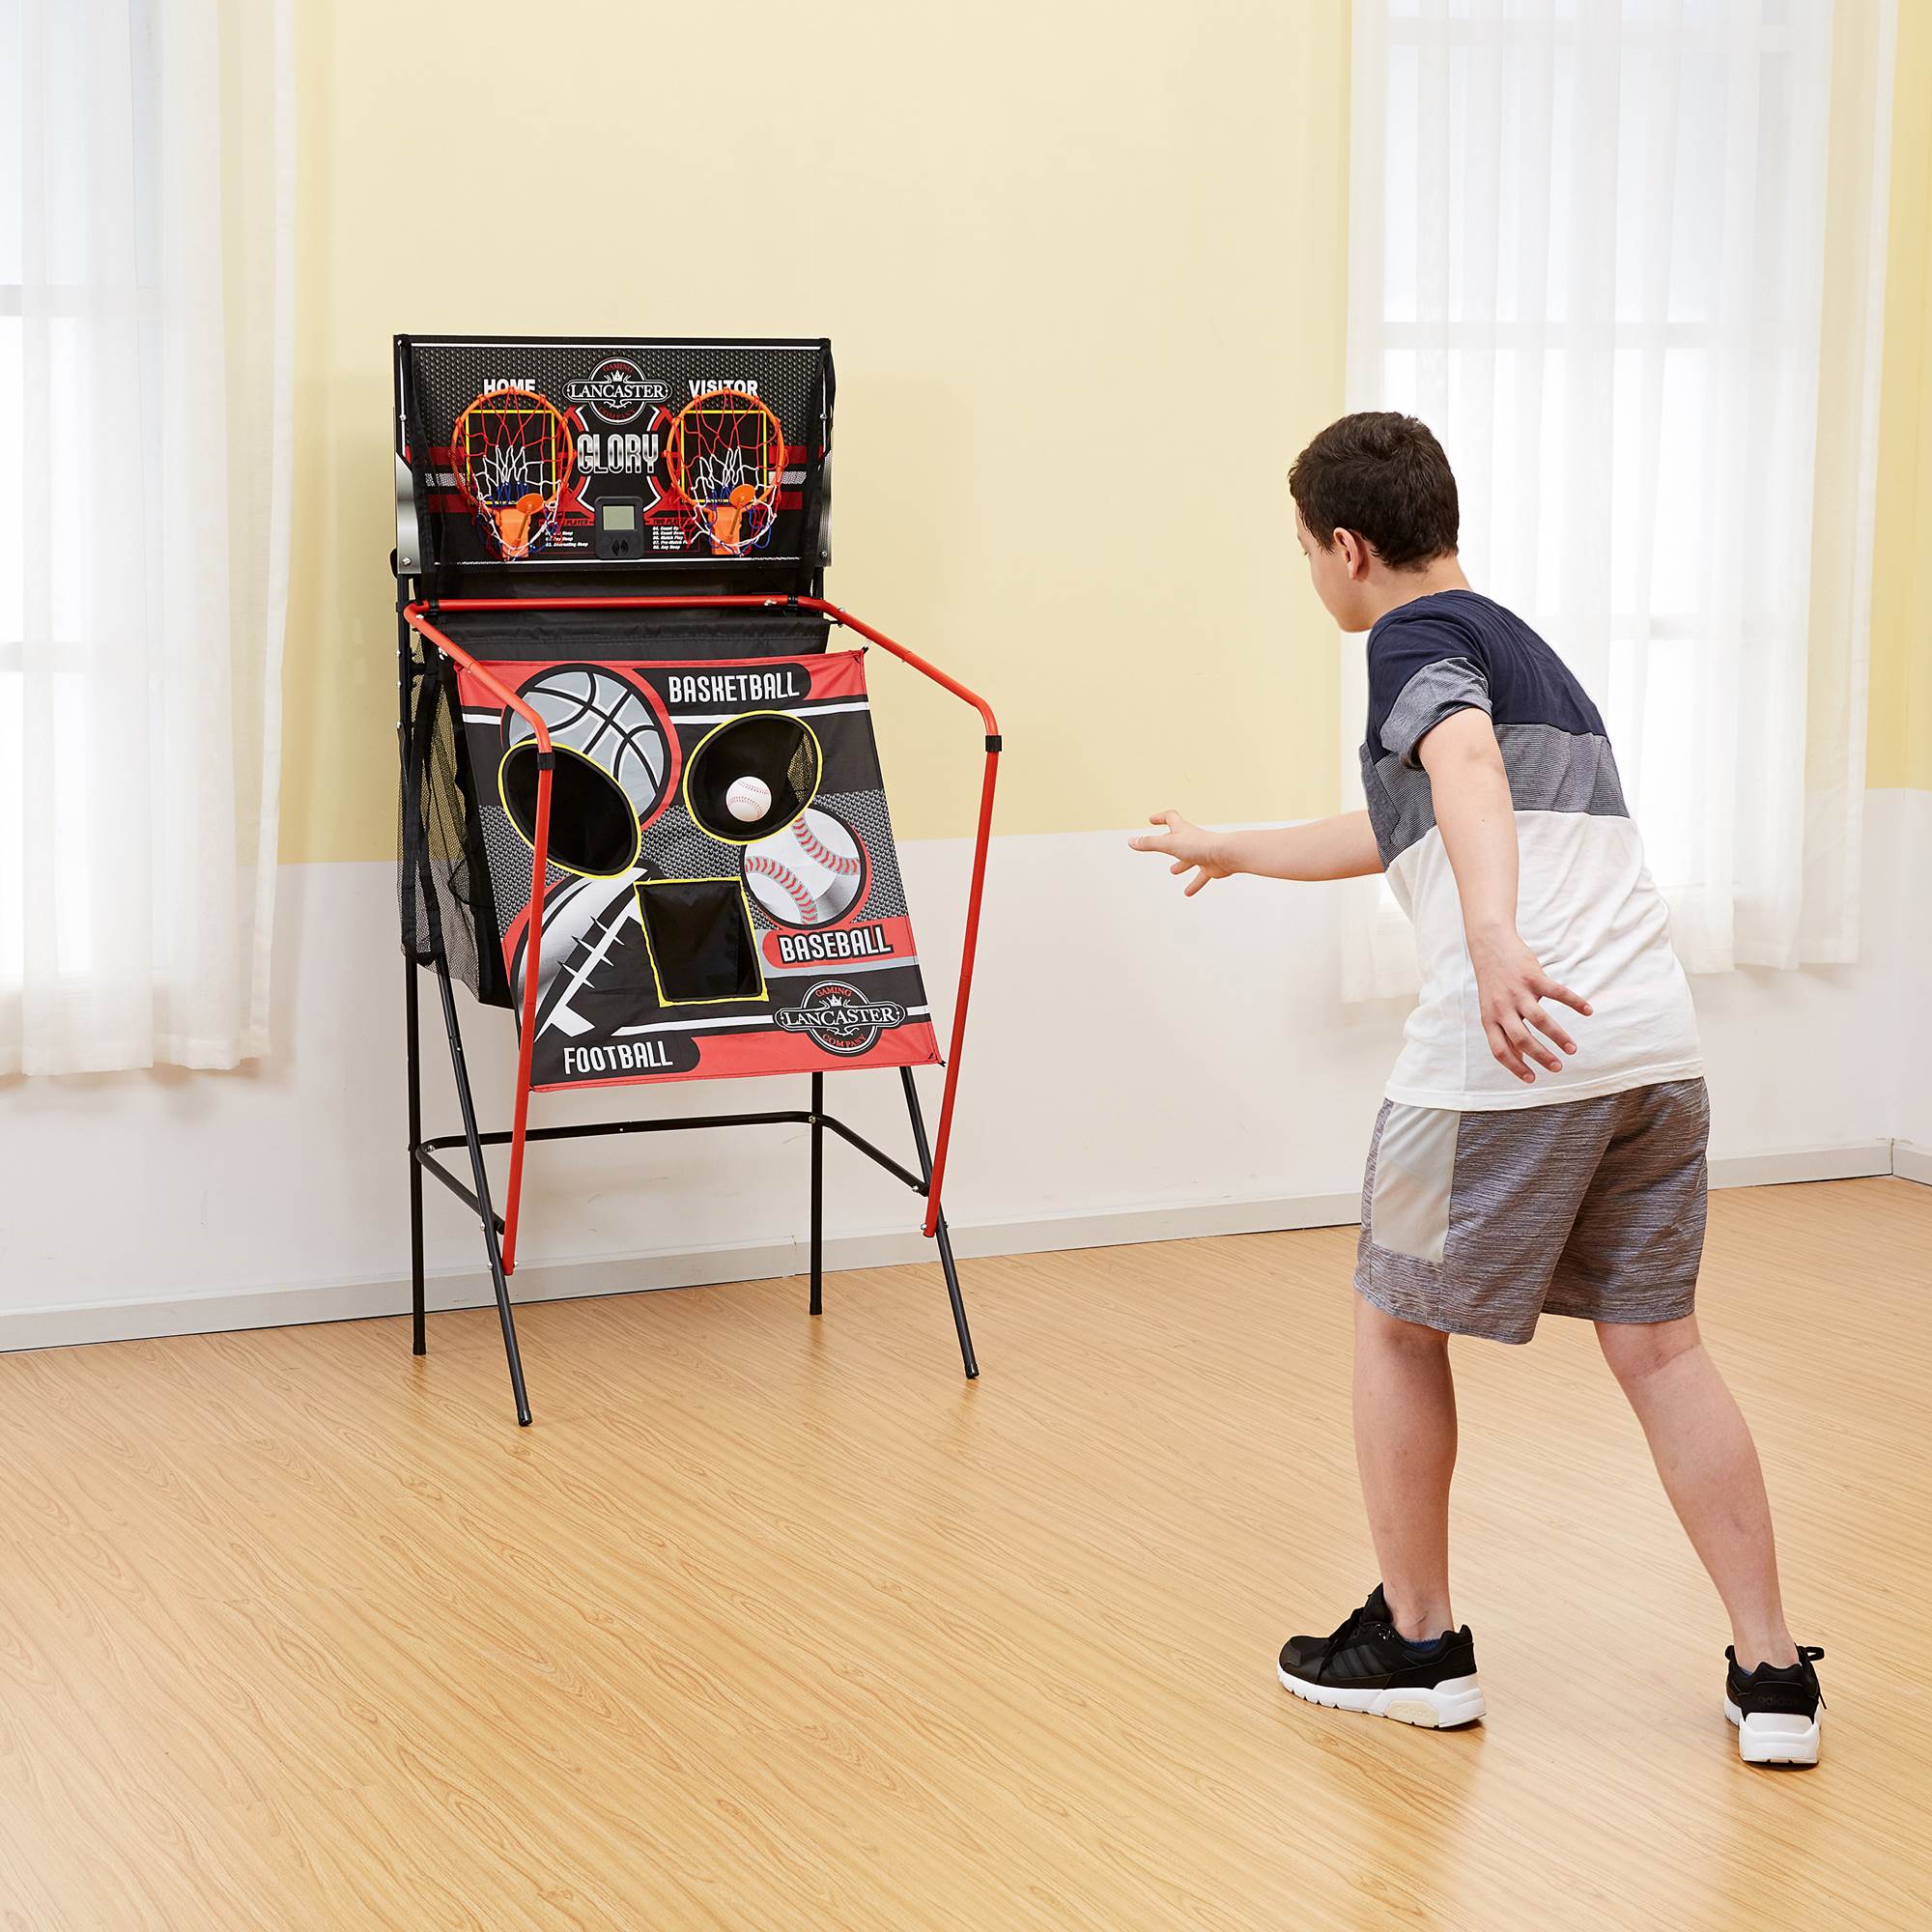 Lancaster Gaming Company Electric Indoor Basketball Game in the Electronic Basketball Games department at Lowes